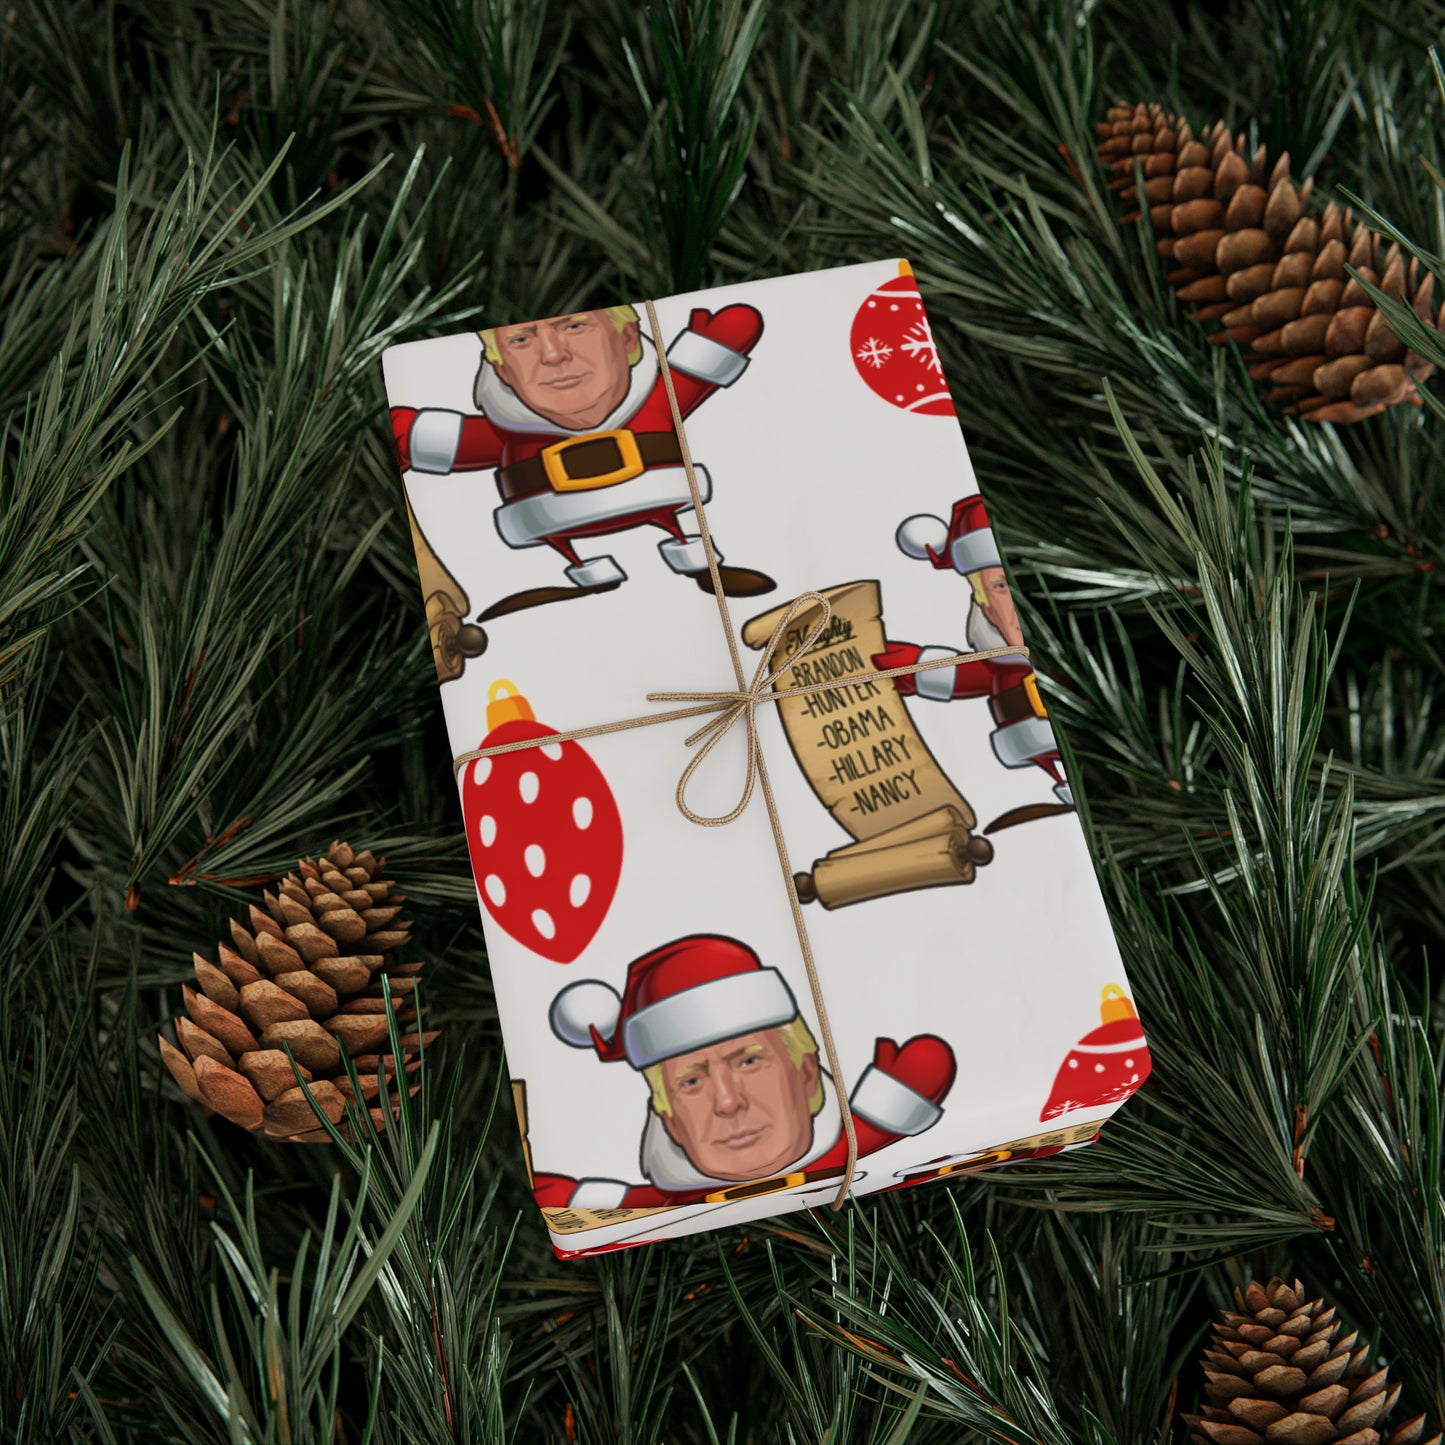 Great Santa Trump Wrapping Paper for Gifts - Trump's Naughty List Christmas Gift Wrap